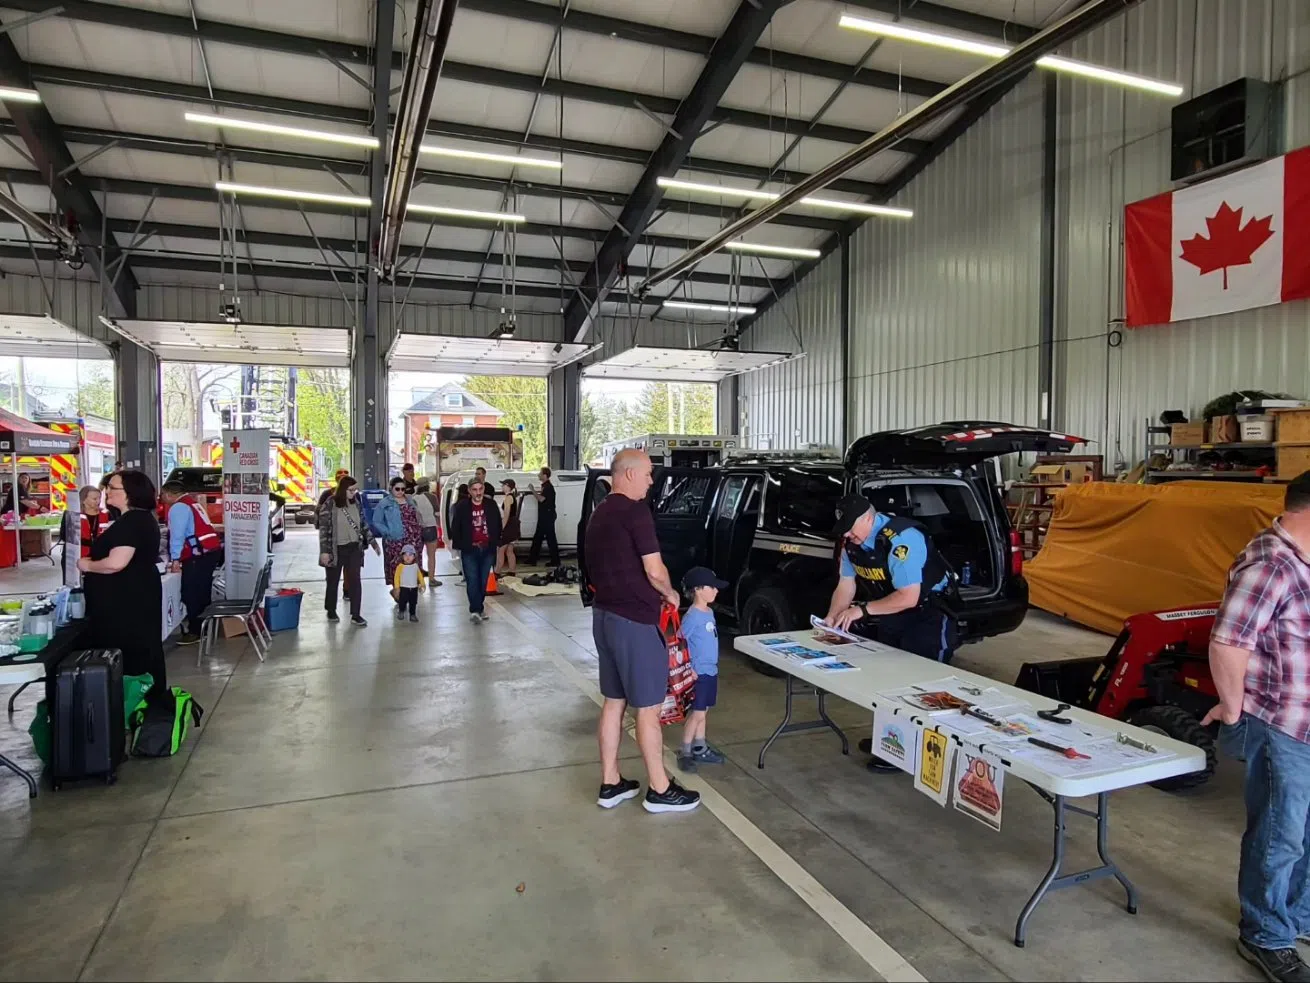 Guelph/Eramosa Fire Department Holding Open House in Rockwood Saturday, May 11th